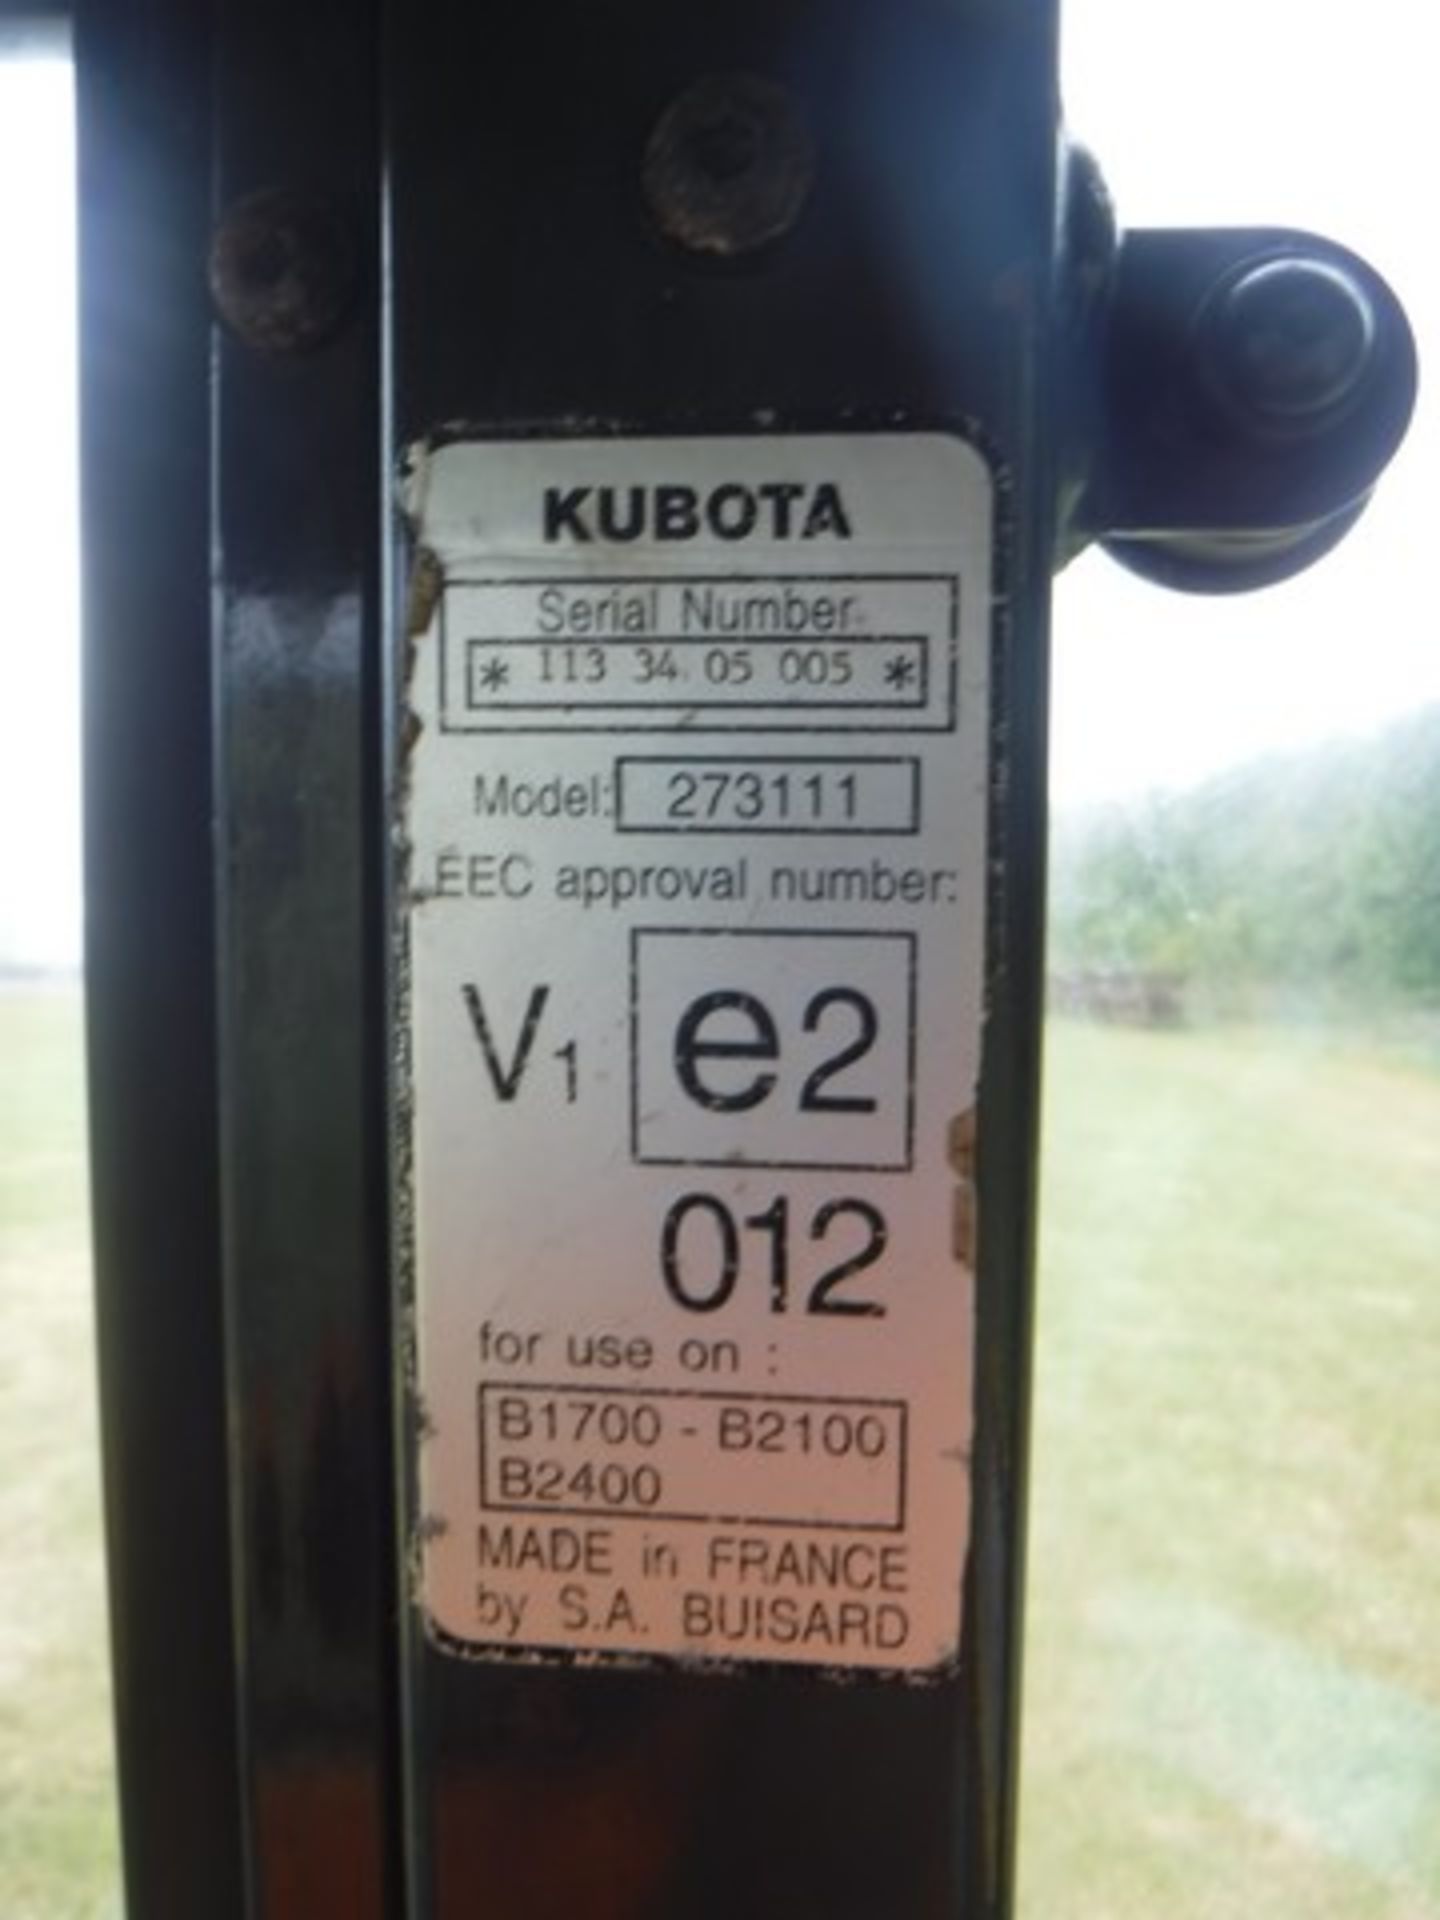 2006 KUBOTA B2400, S/N D31793, REG - SP56DHK, 1254HRS (NOT VERIFIED), COMPACT TRACTOR WITH SNOW PLOU - Image 9 of 17